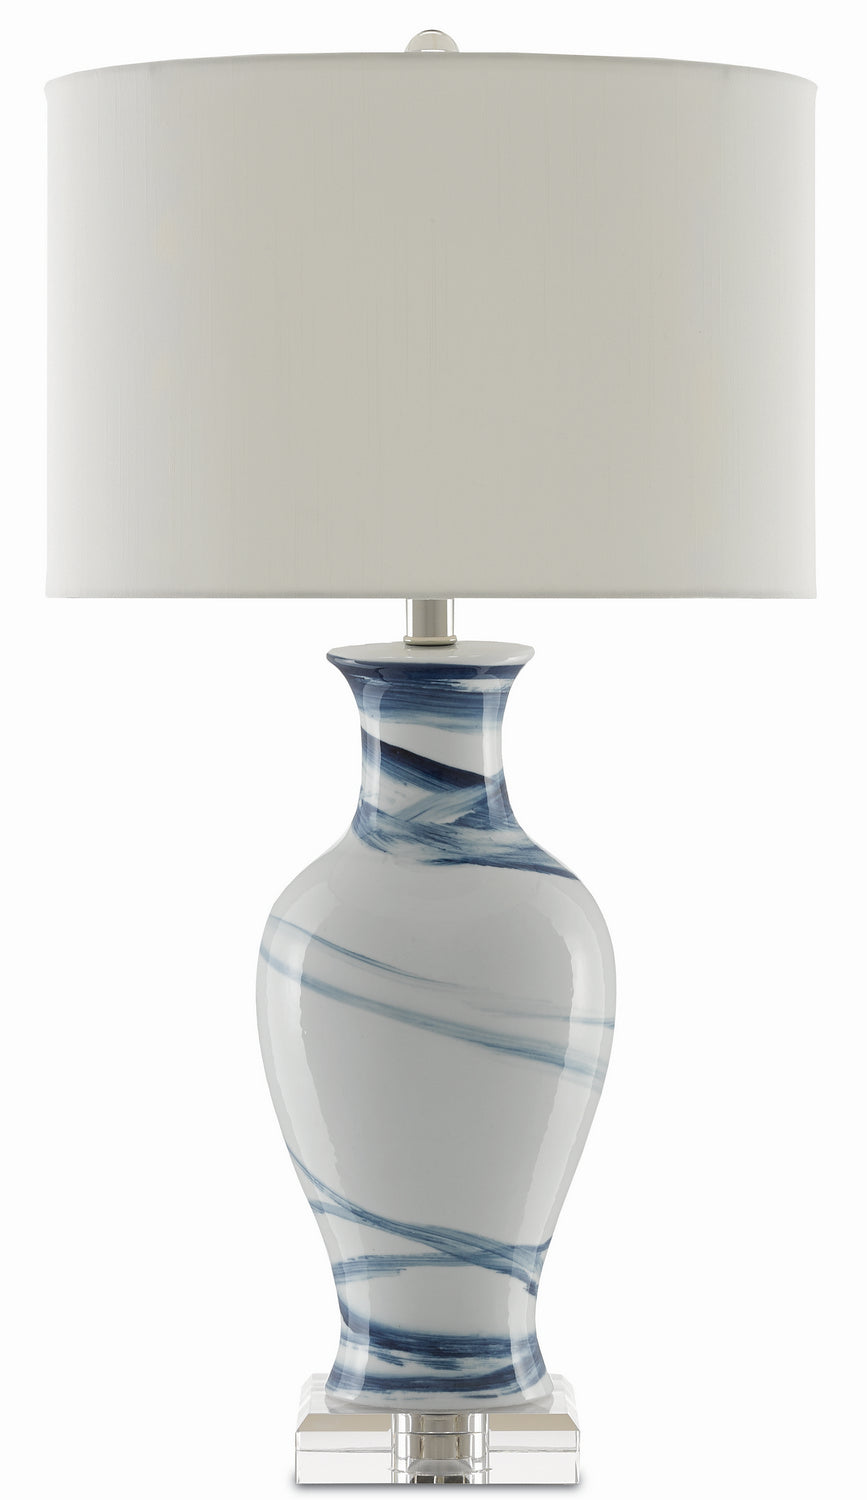 One Light Table Lamp from the Hanni collection in White/Blue finish